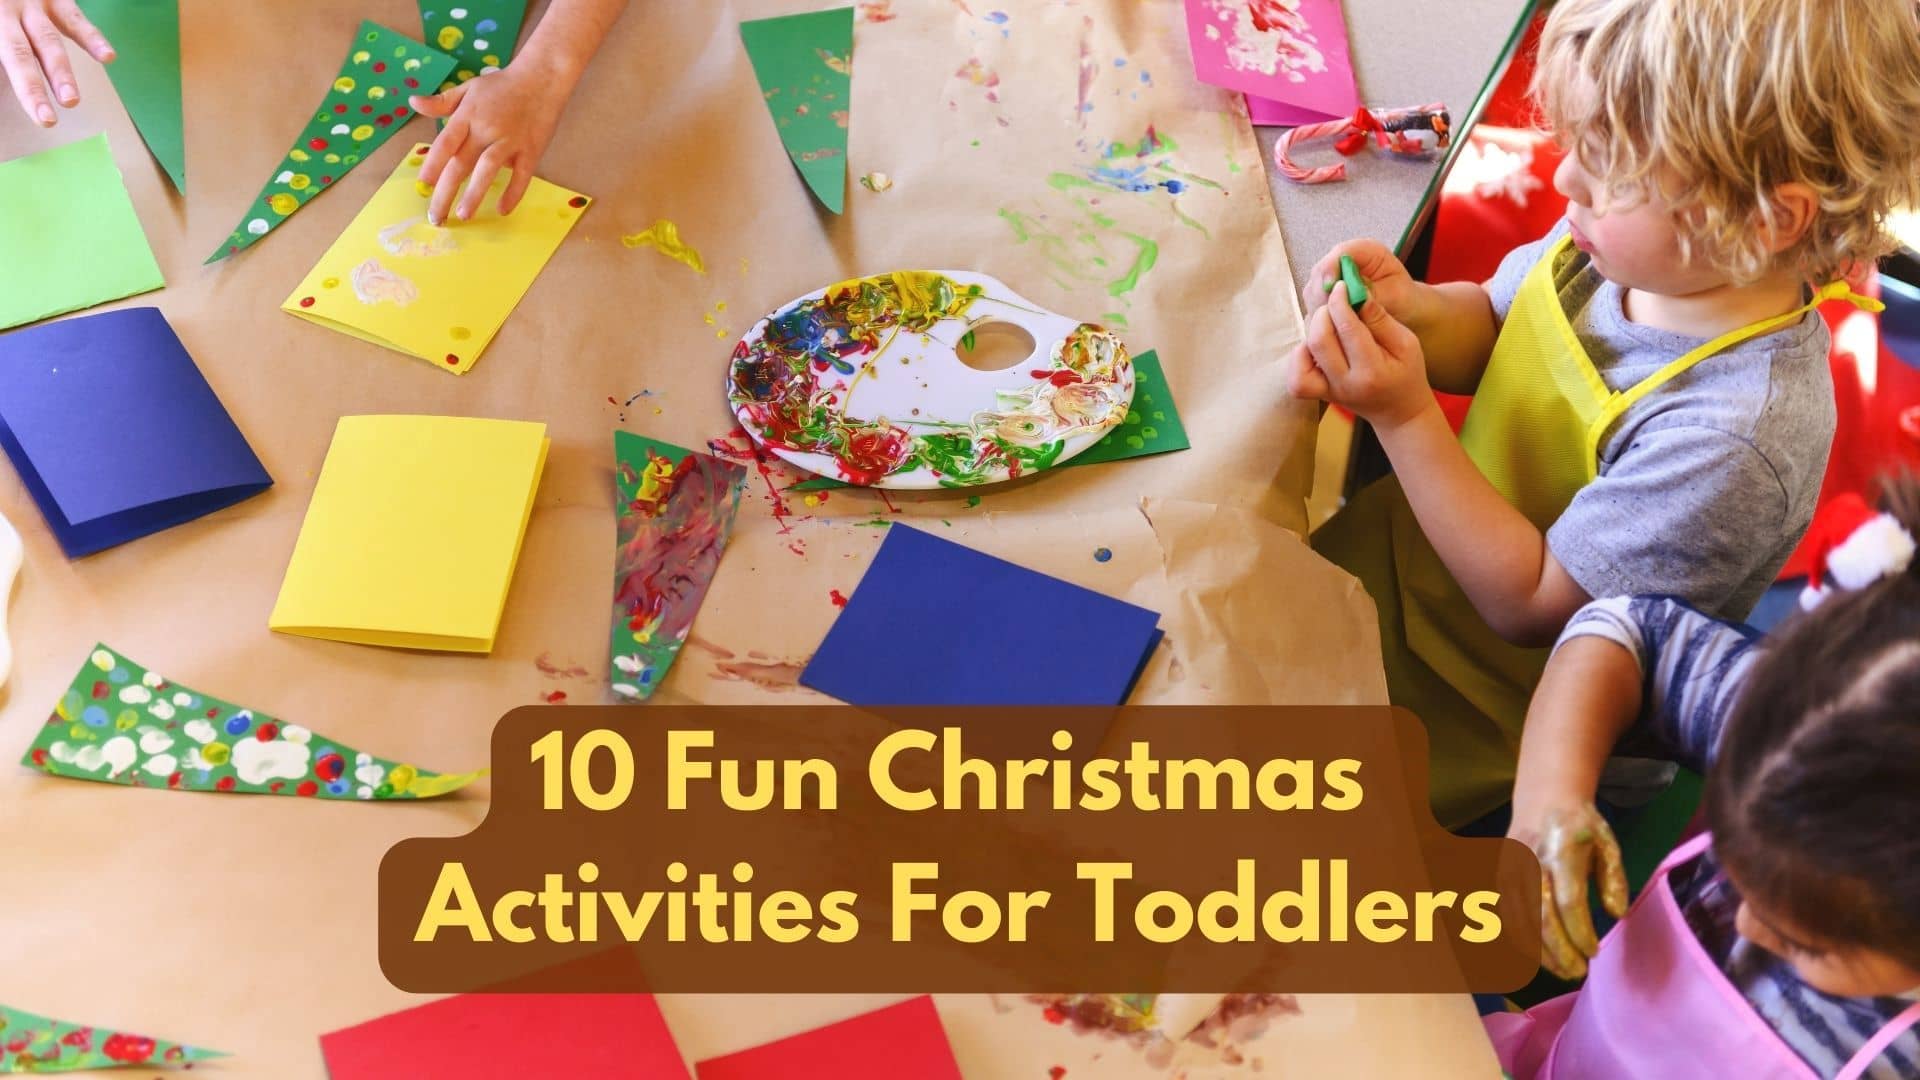 10 Fun Christmas activities for toddlers?